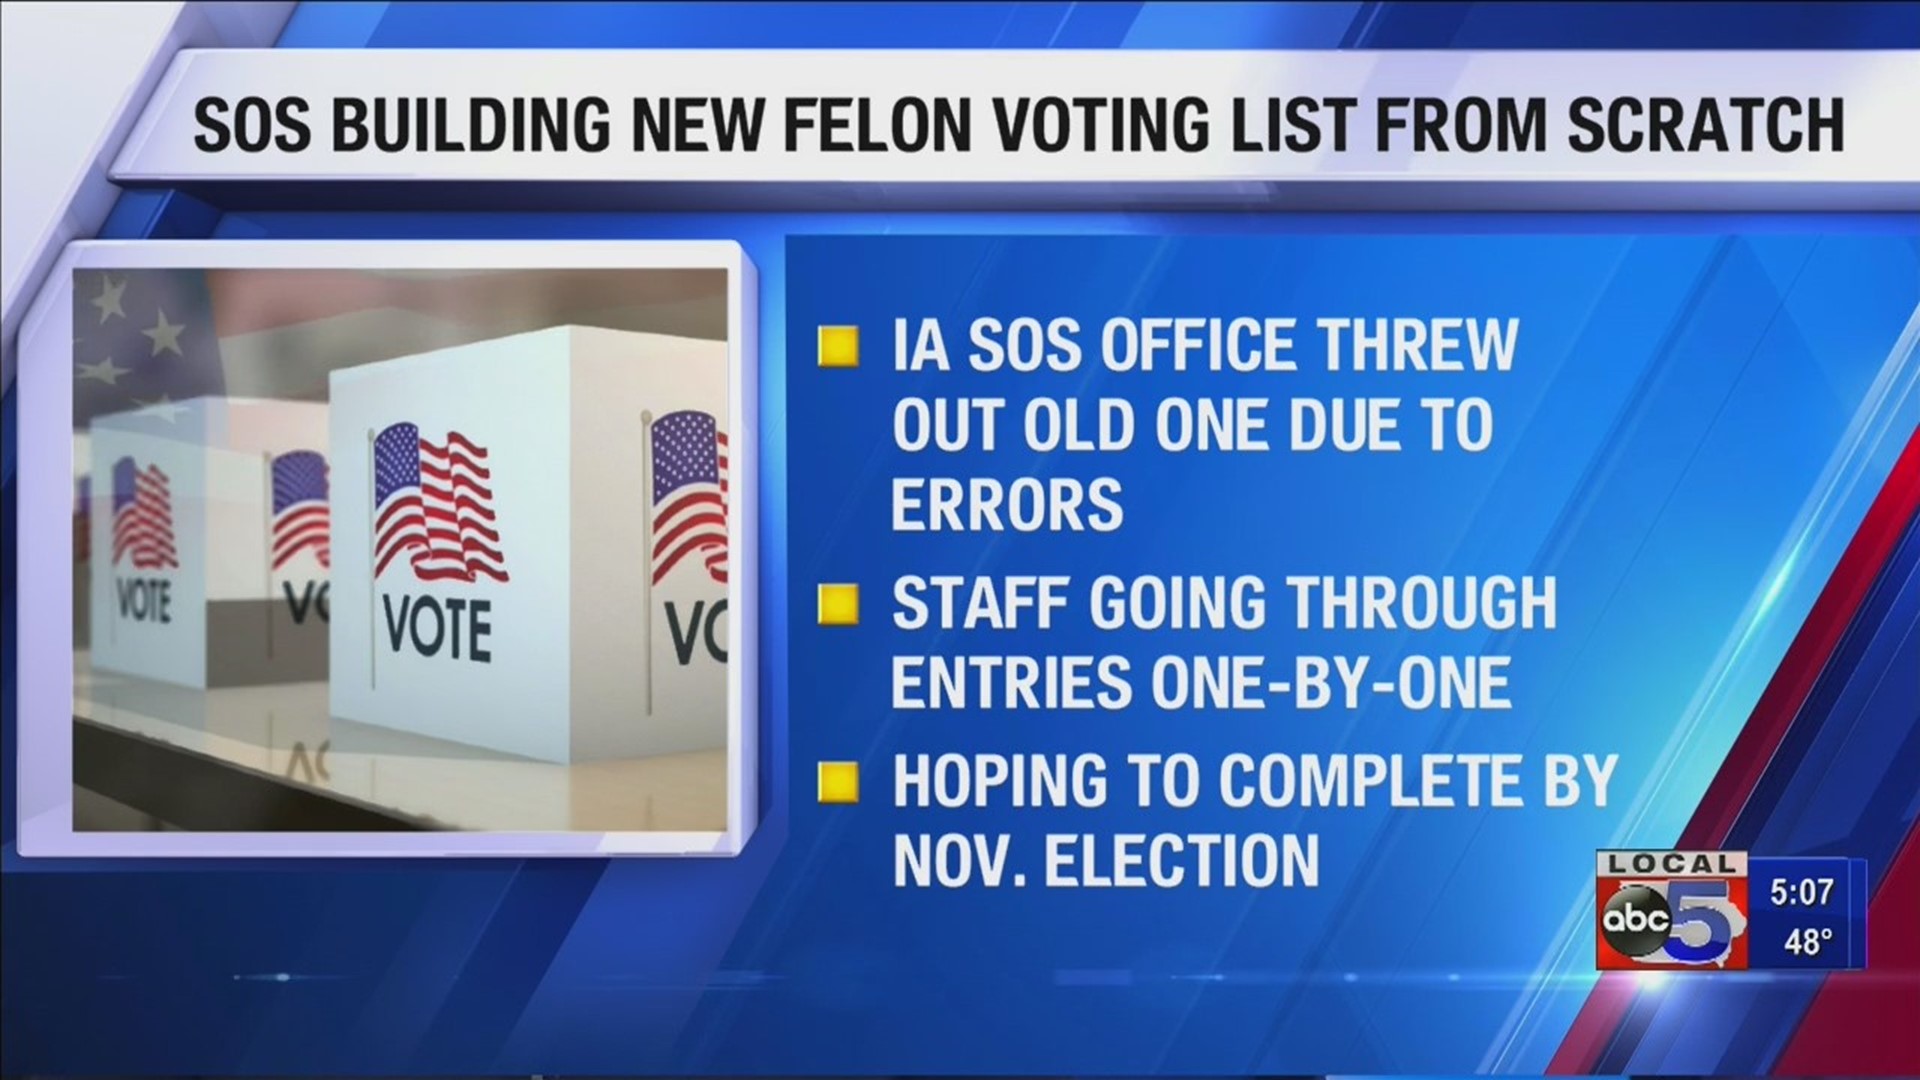 Citing errors, Iowa removes list of felon voters amid review